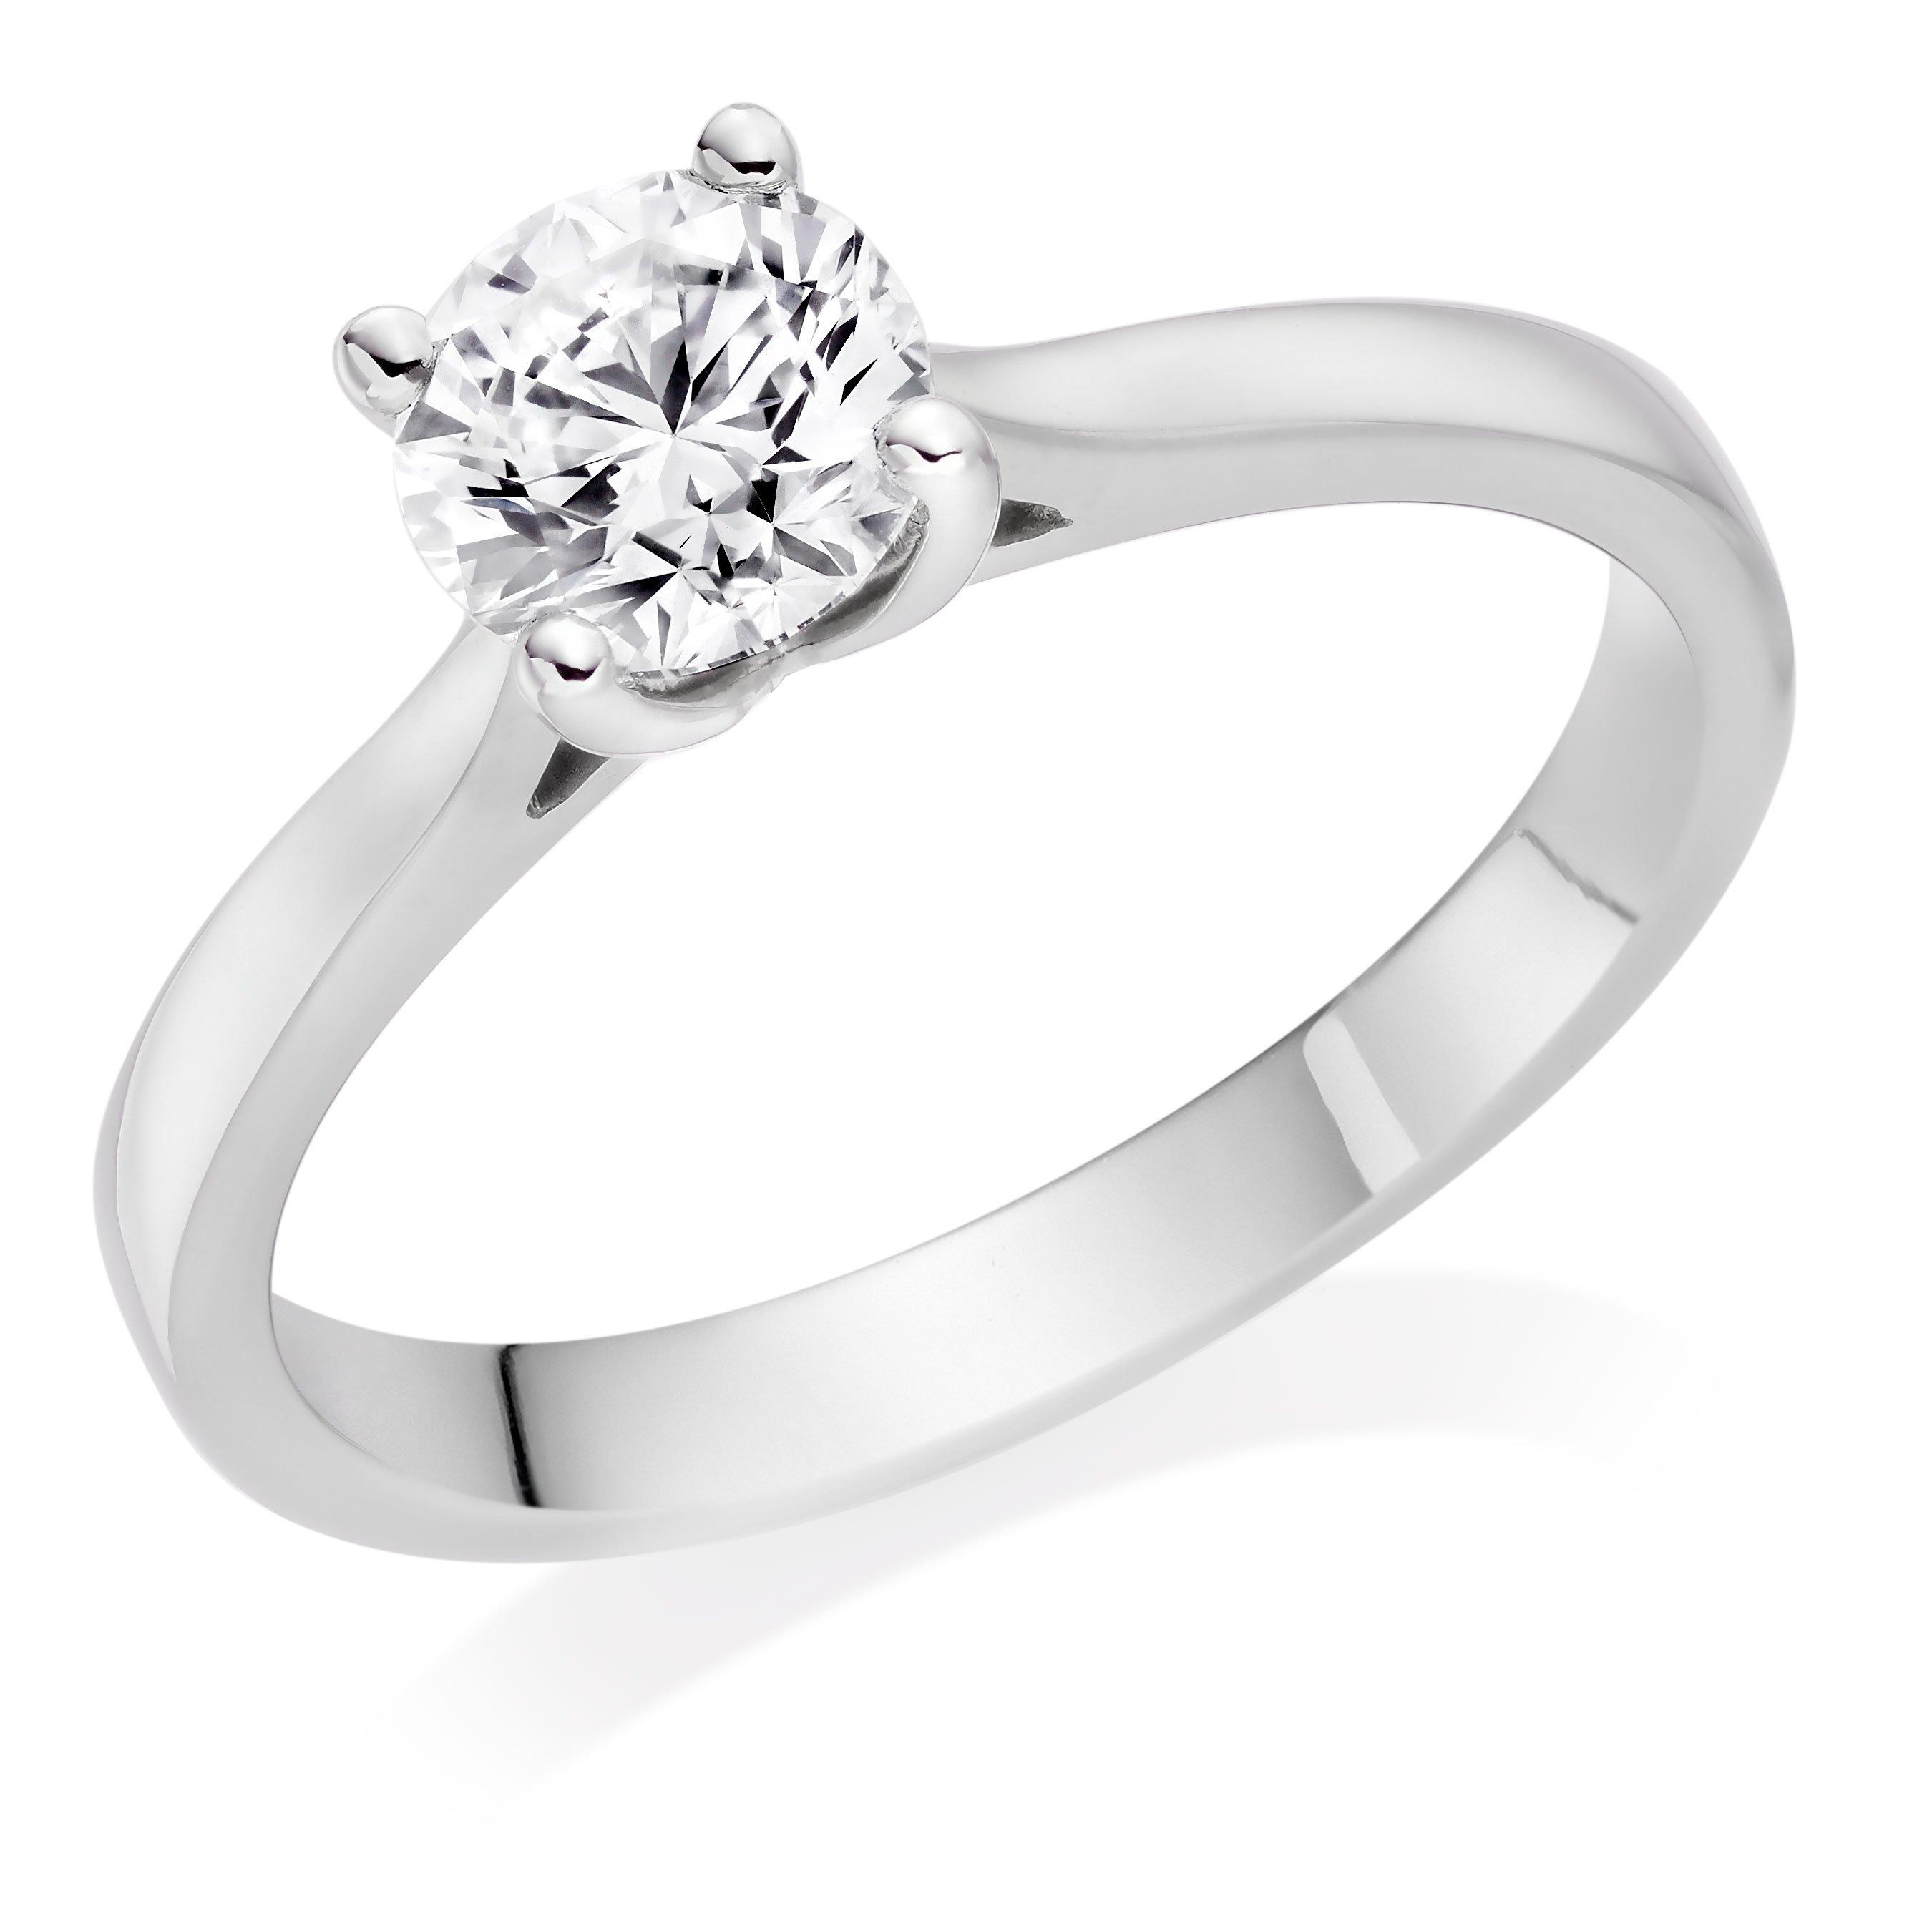 Once Platinum Diamond Solitaire Ring | 0105436 | Beaverbrooks the Jewellers